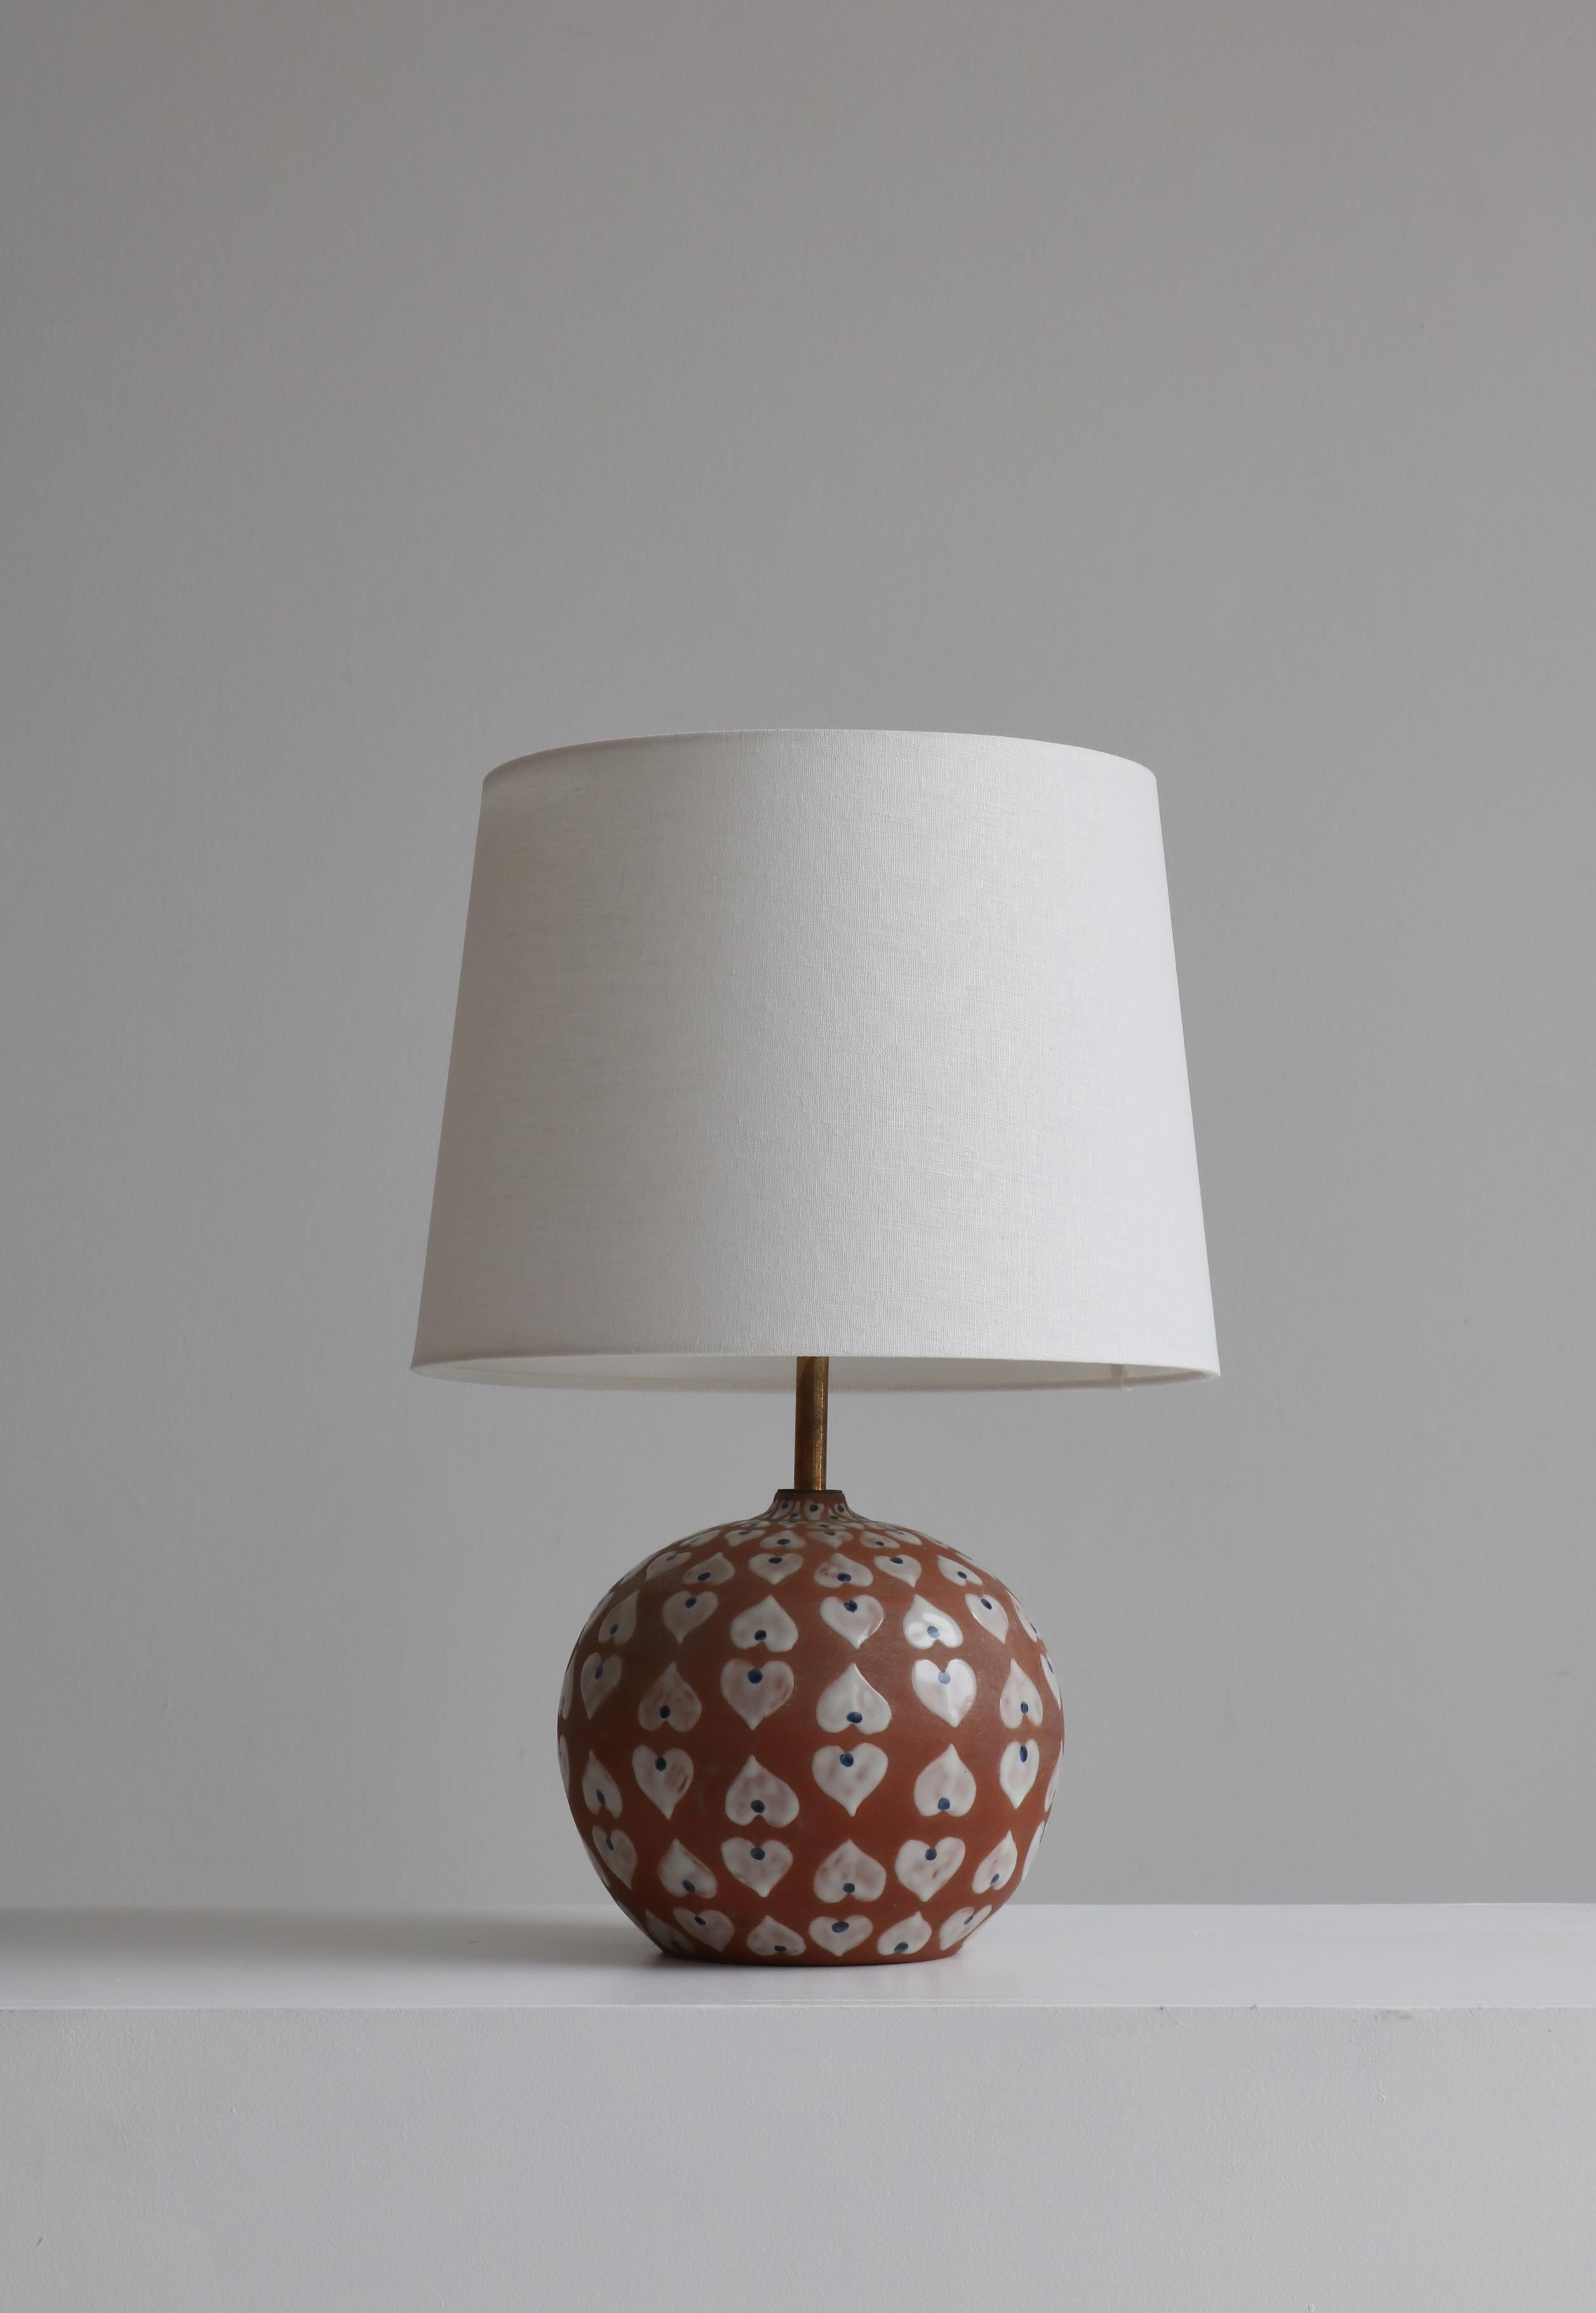 Unique and beautiful table lamp made at 